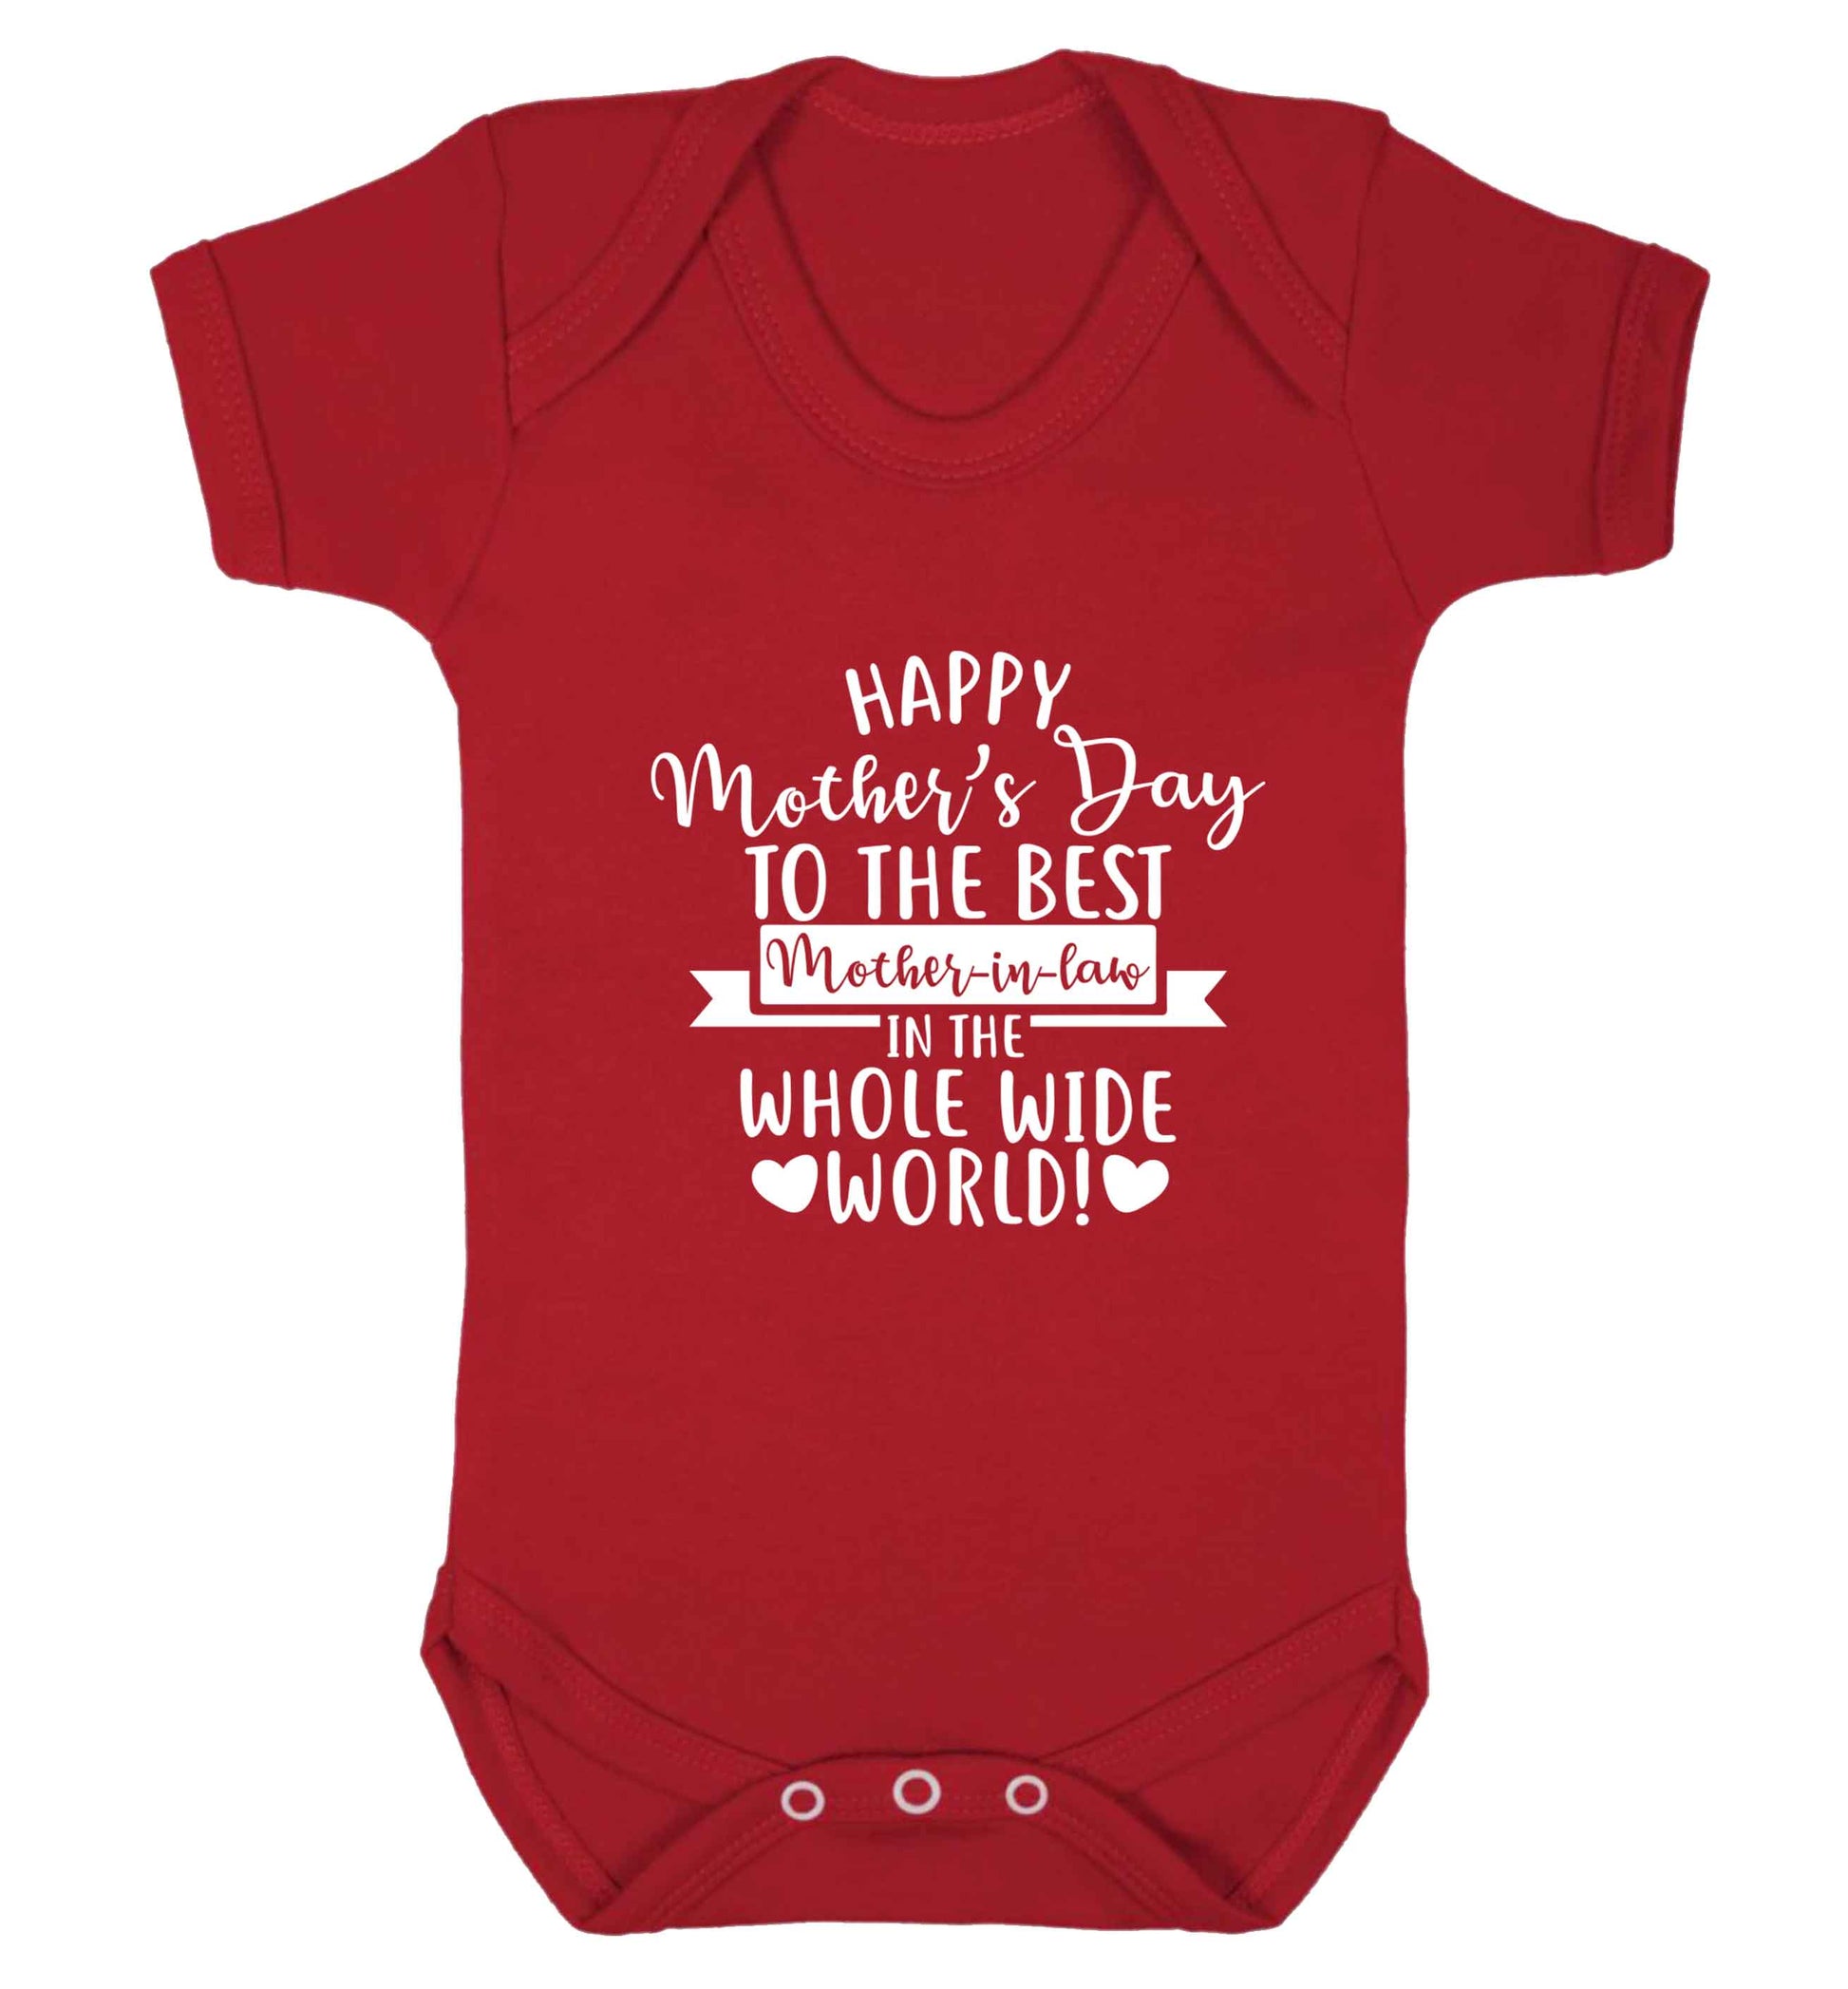 Happy mother's day to the best mother-in law in the world baby vest red 18-24 months